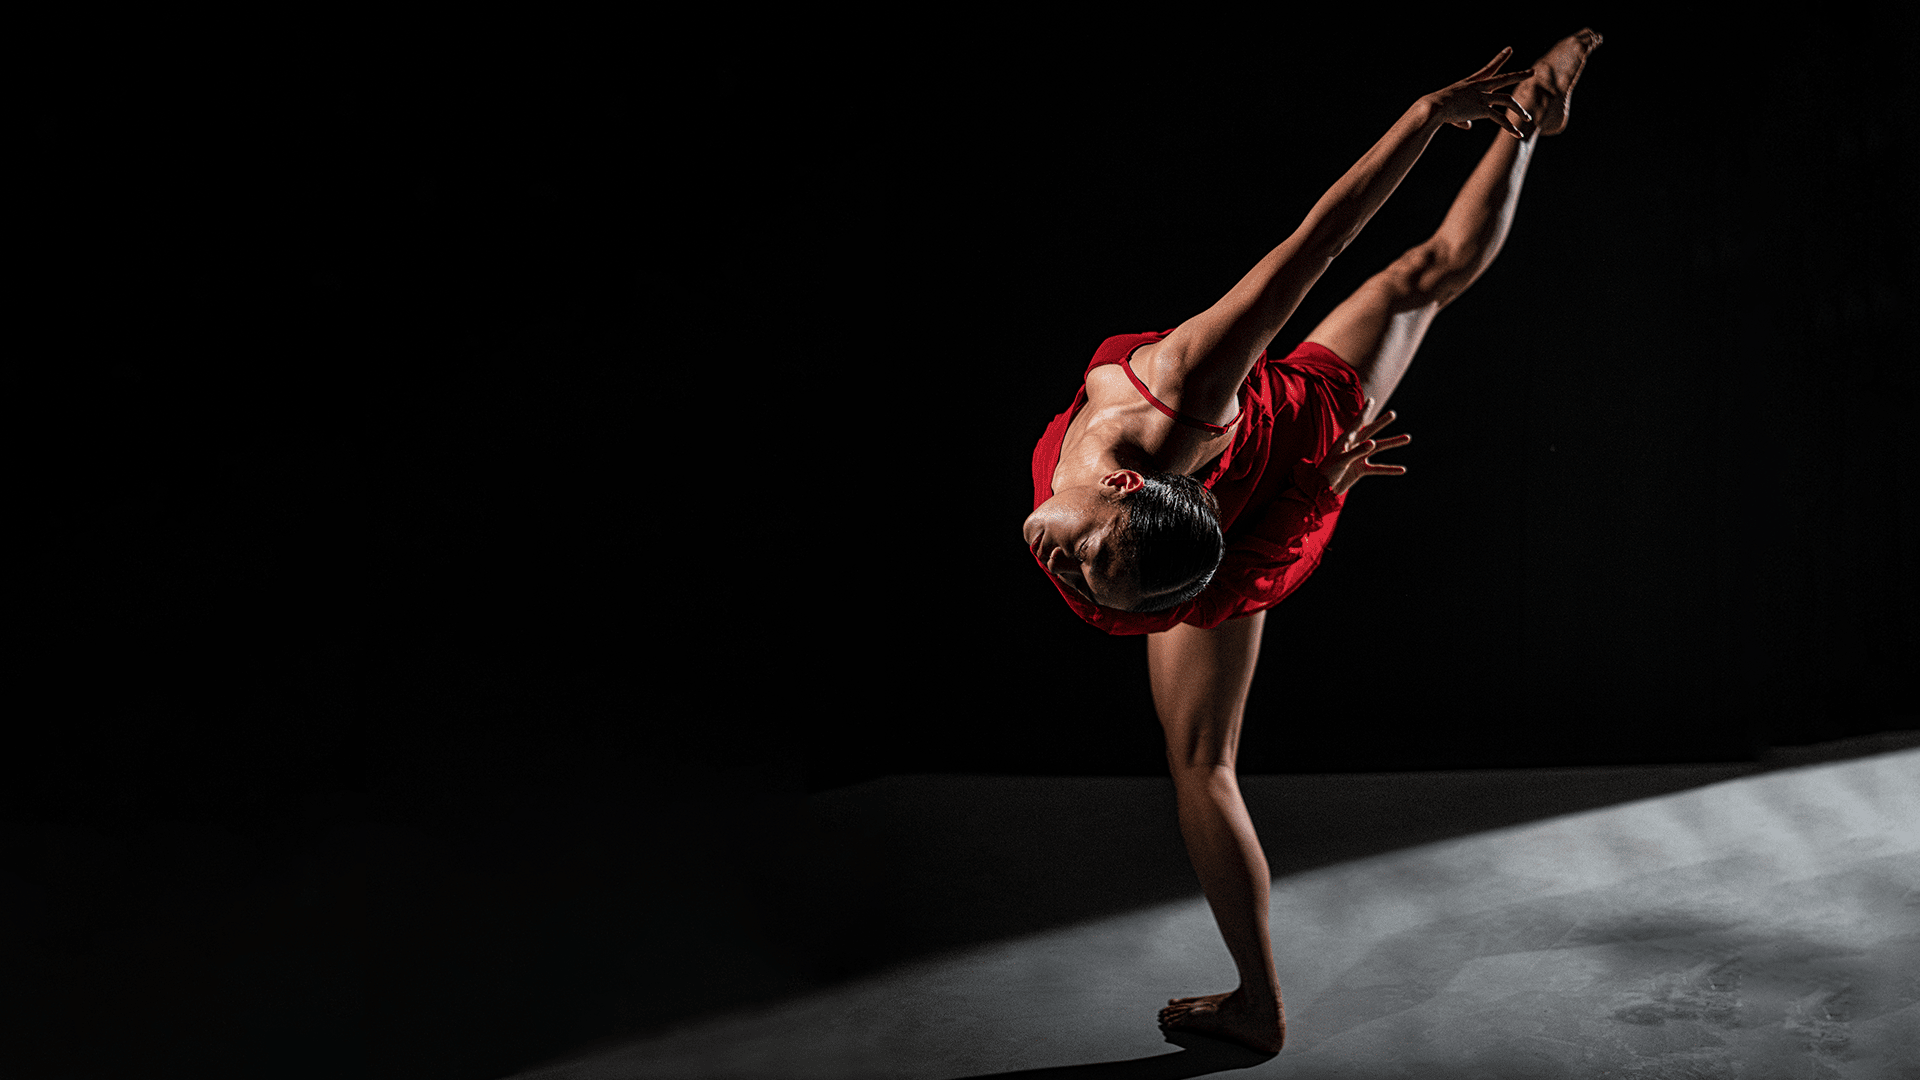 Hot House promotional image (photo by Jon Bishop): A female dancer is dramatically lit against a black curtain. She wears a short, vibrant red dress. She balances on her left leg, arching her back in a pose that seems to defy gravity. She lifts her right leg up, pointing it up and out to the side. The pose has a sense of flow, as though the camera has caught her in motion.